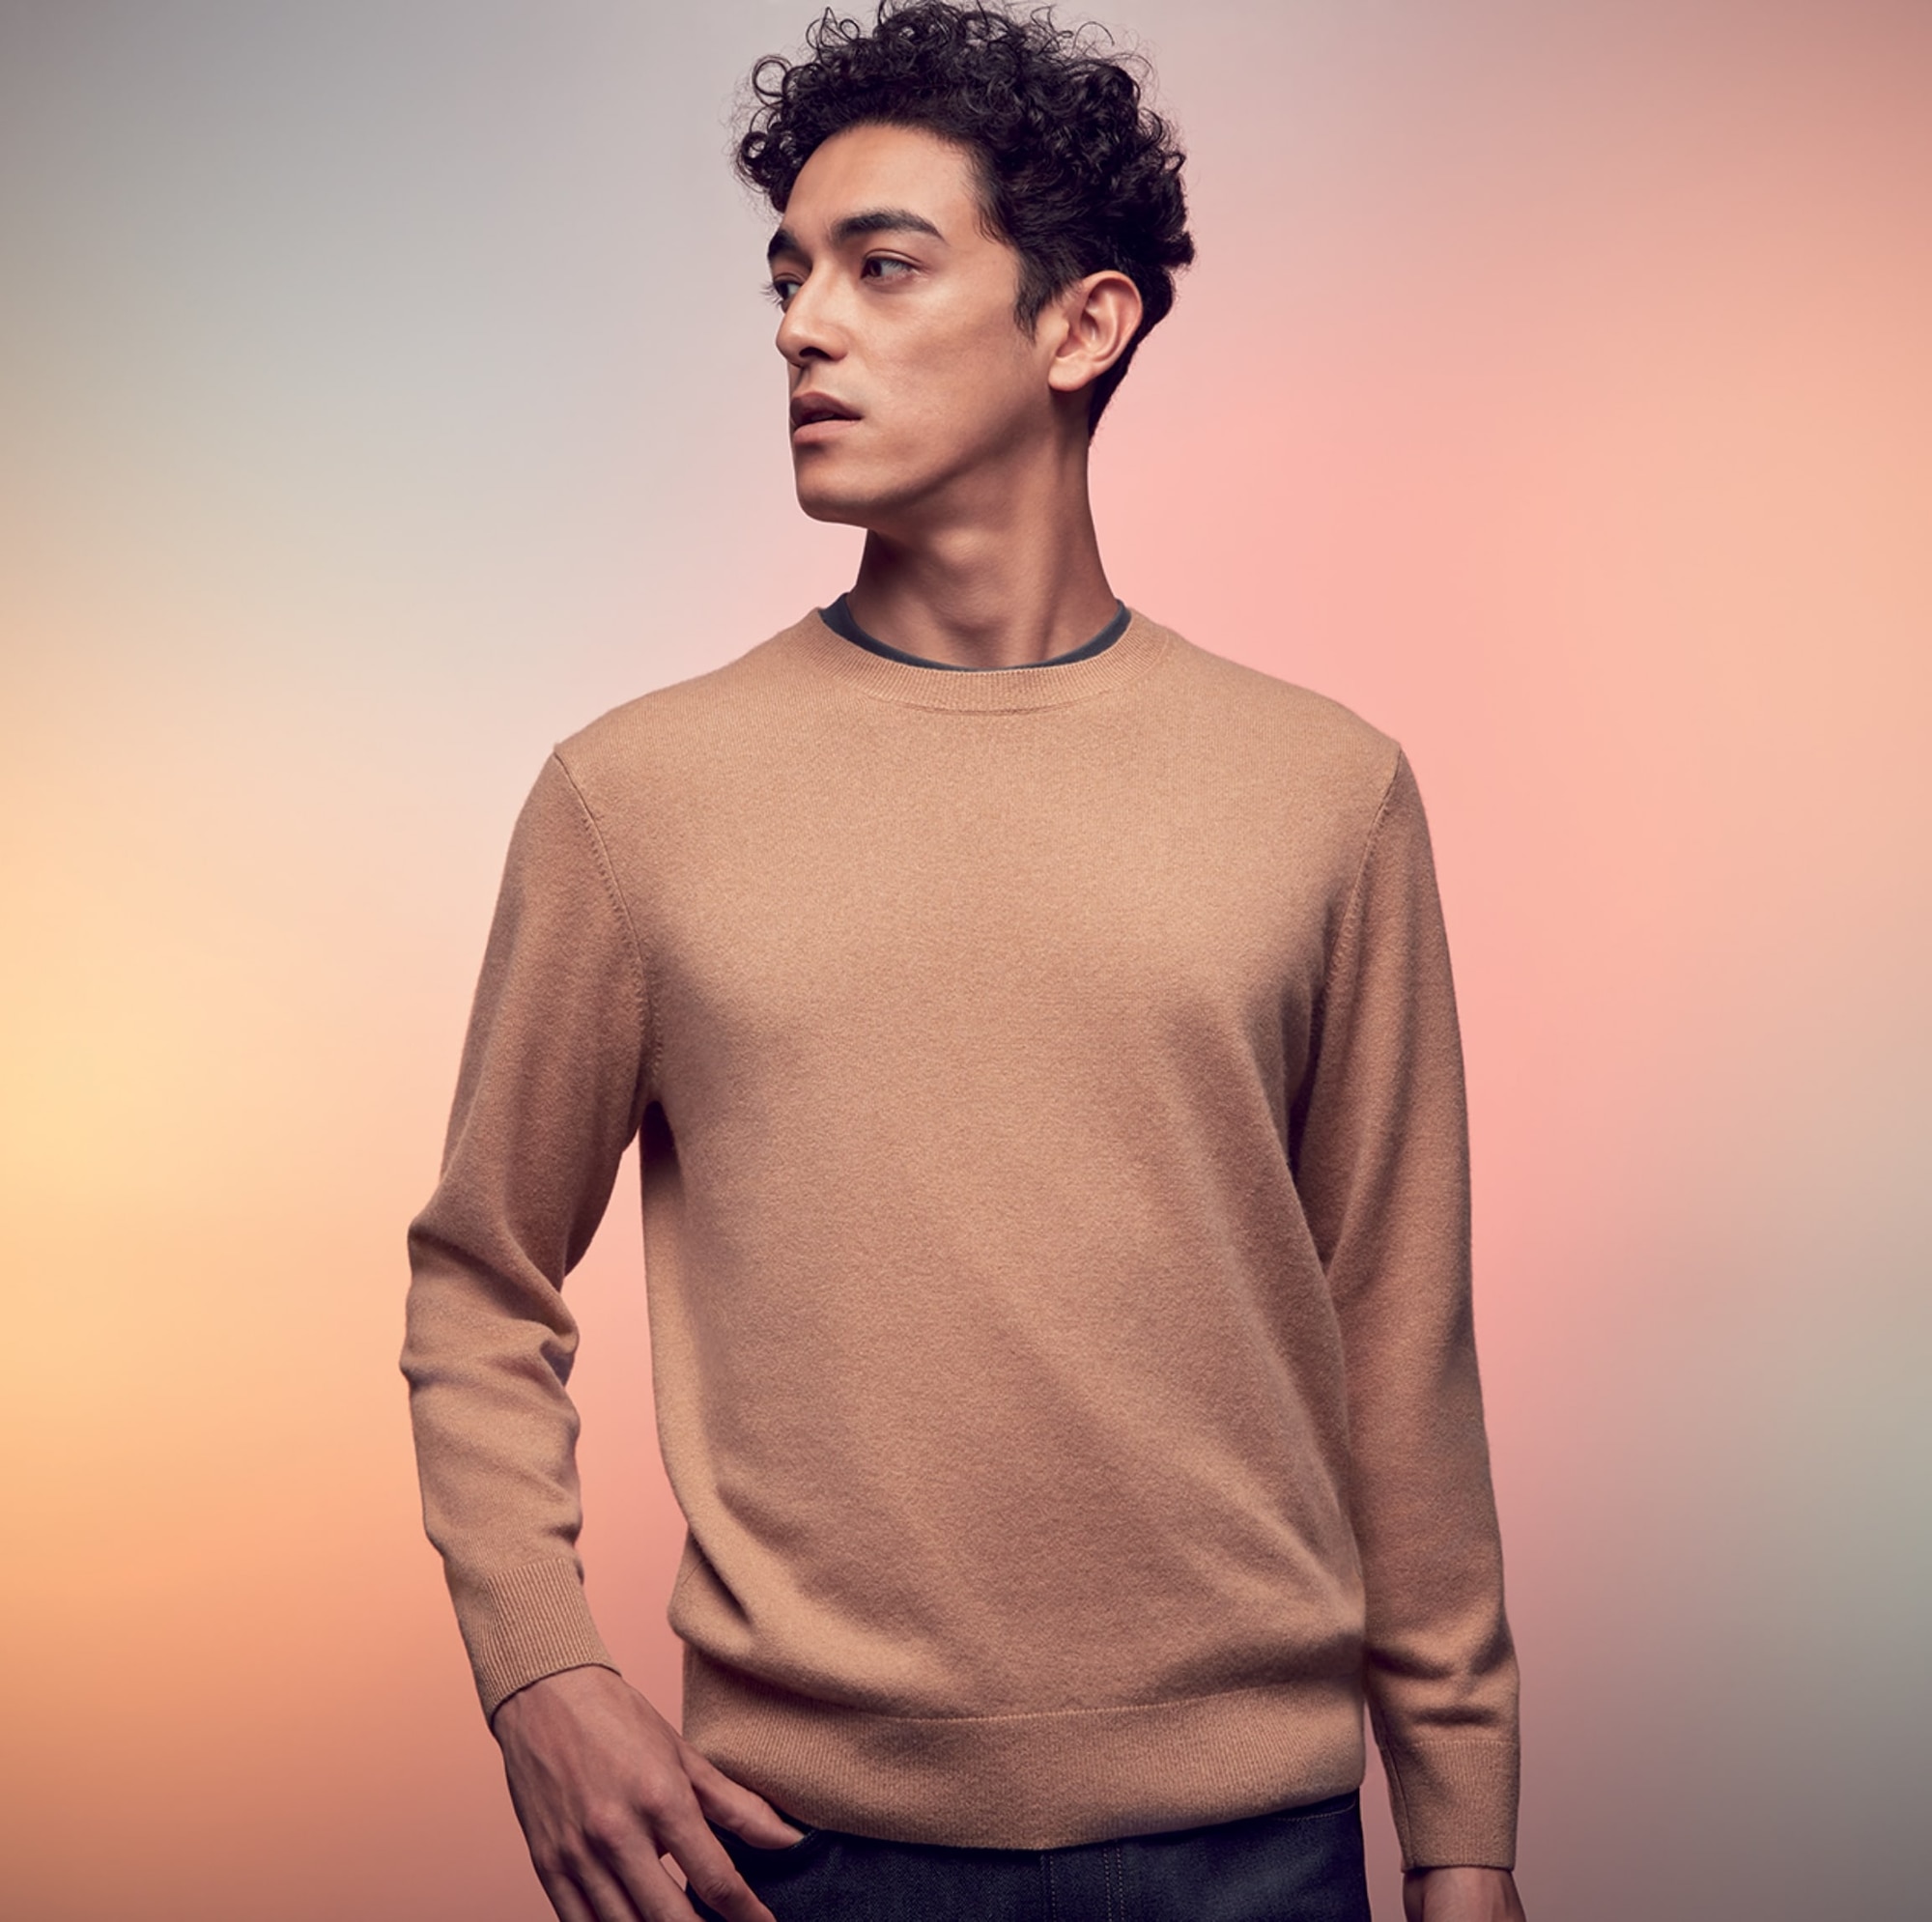 Medium Brown -UK Man's Medium Size Man's Next 100% Pure Lambswool Clothing Mens Clothing Jumpers Pullover Jumpers Man's Crew Neck Sweater 